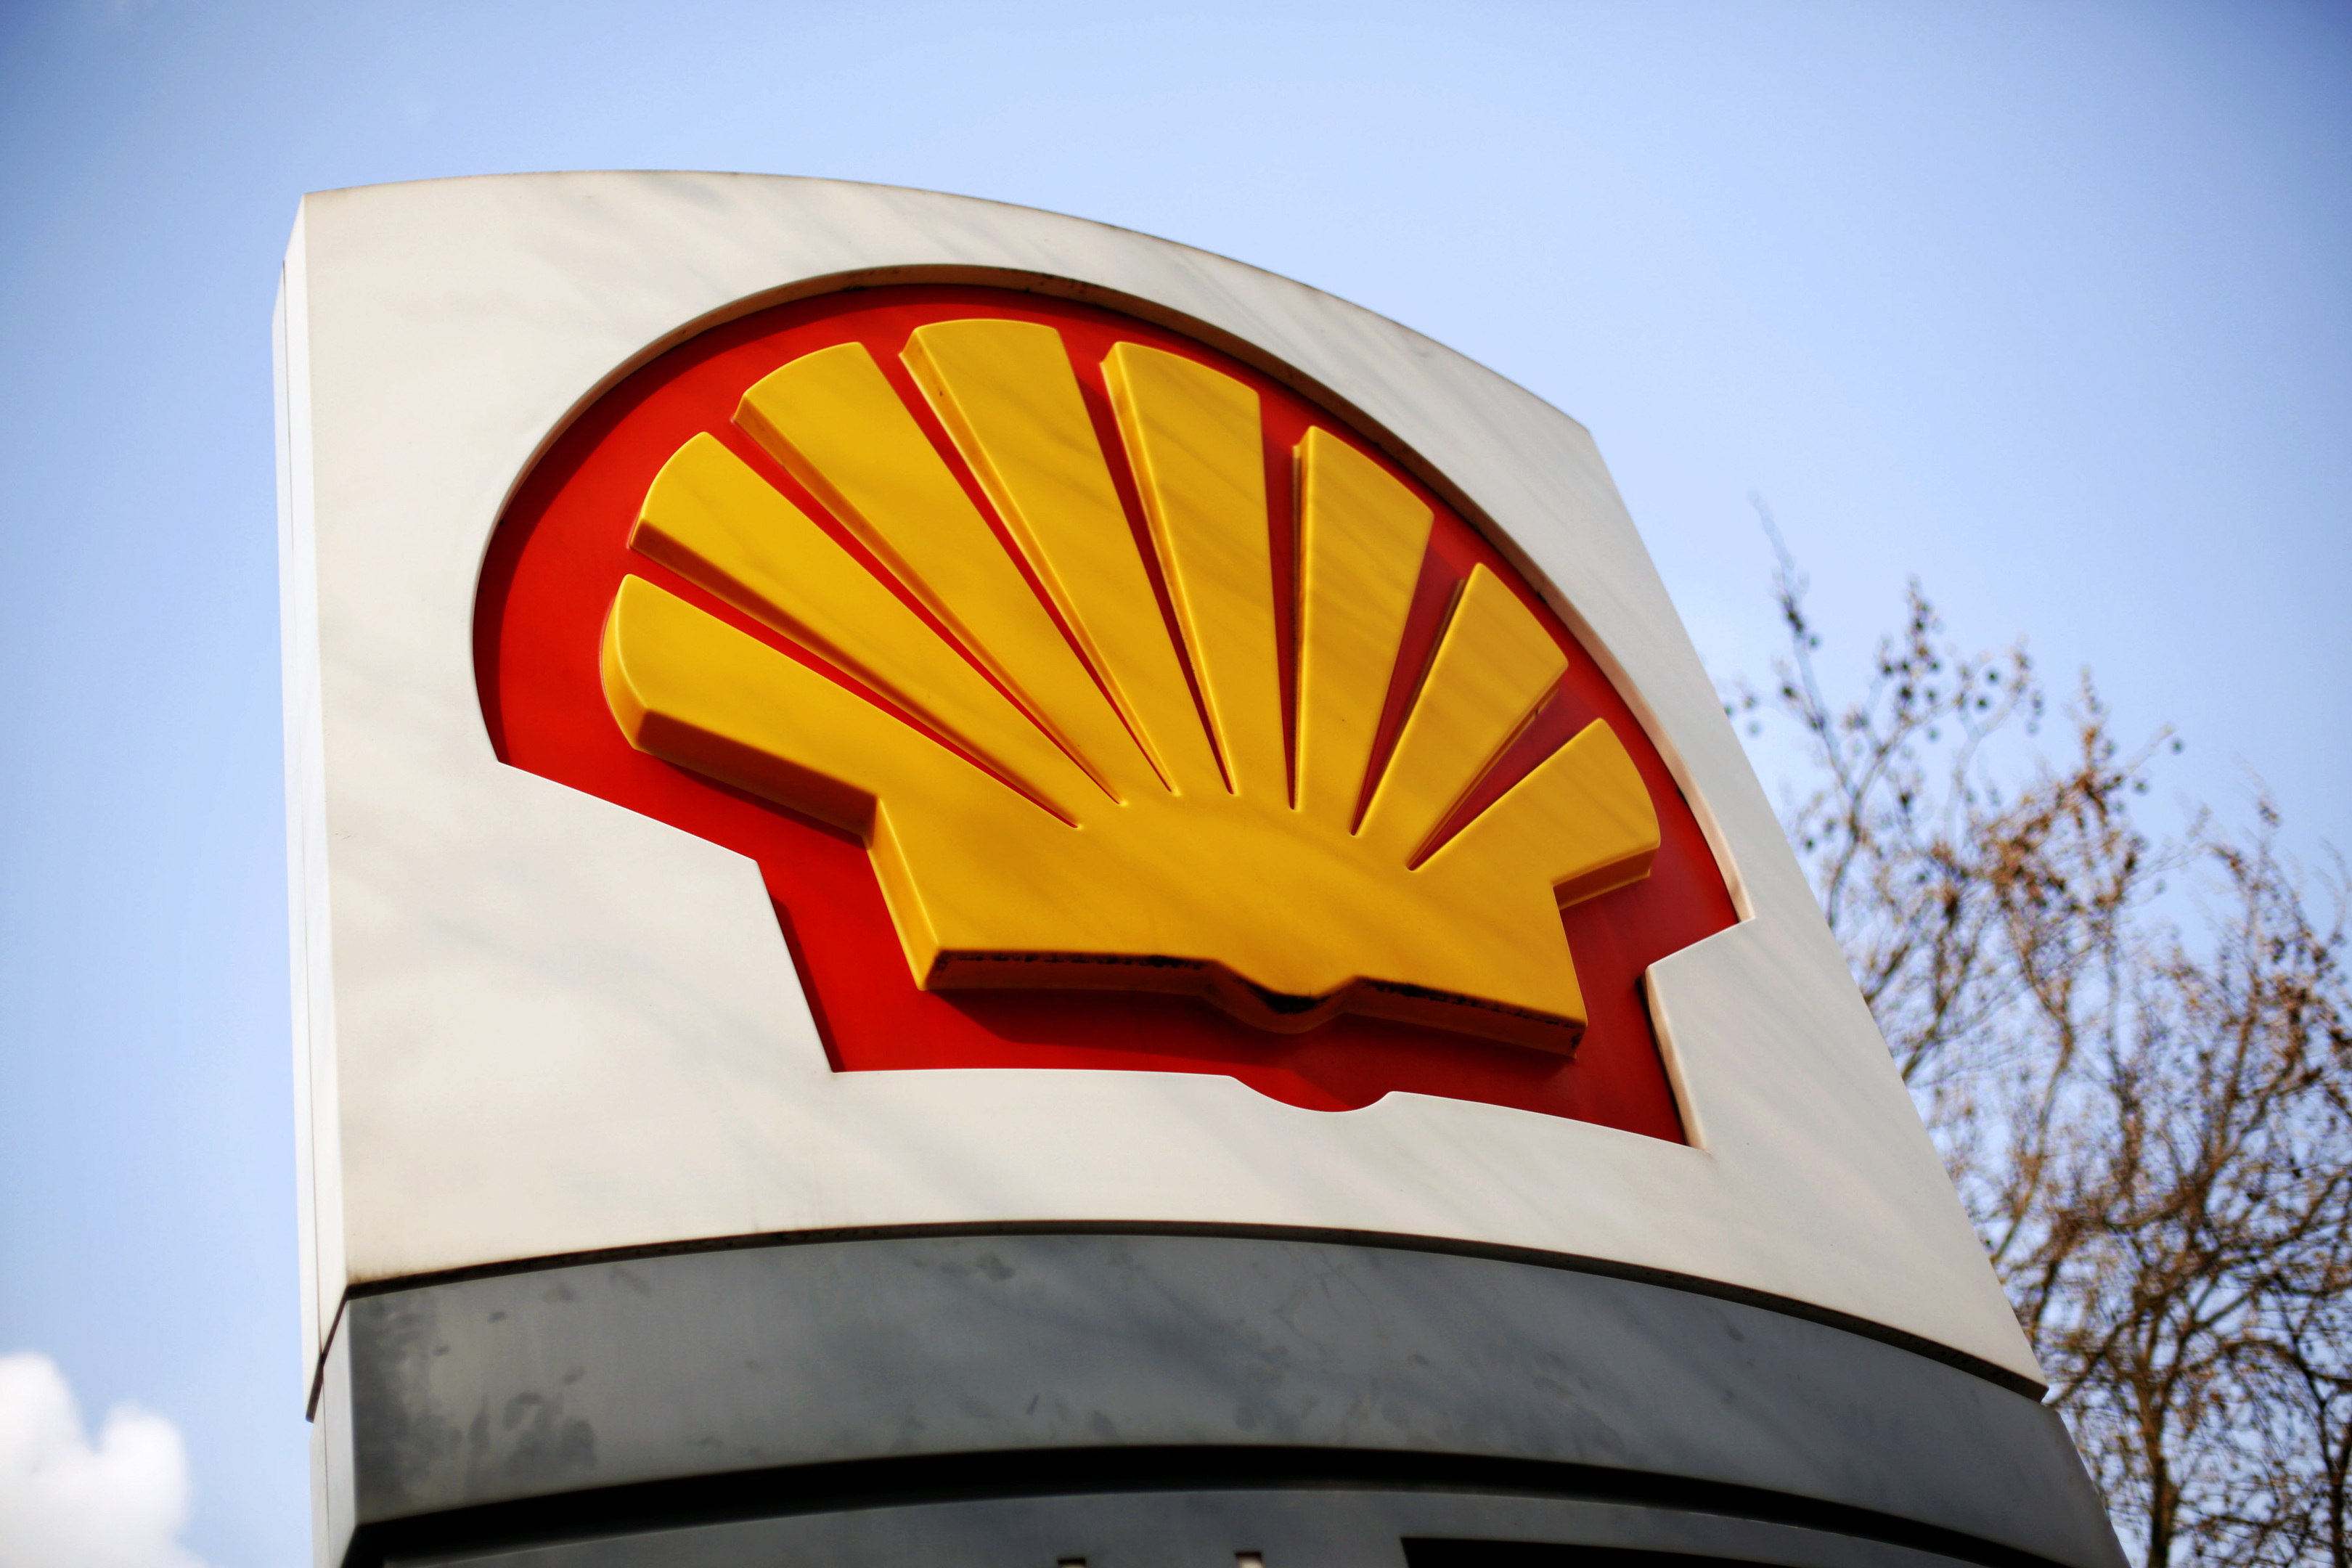 Shell is blaming the falling oil price for the cuts.